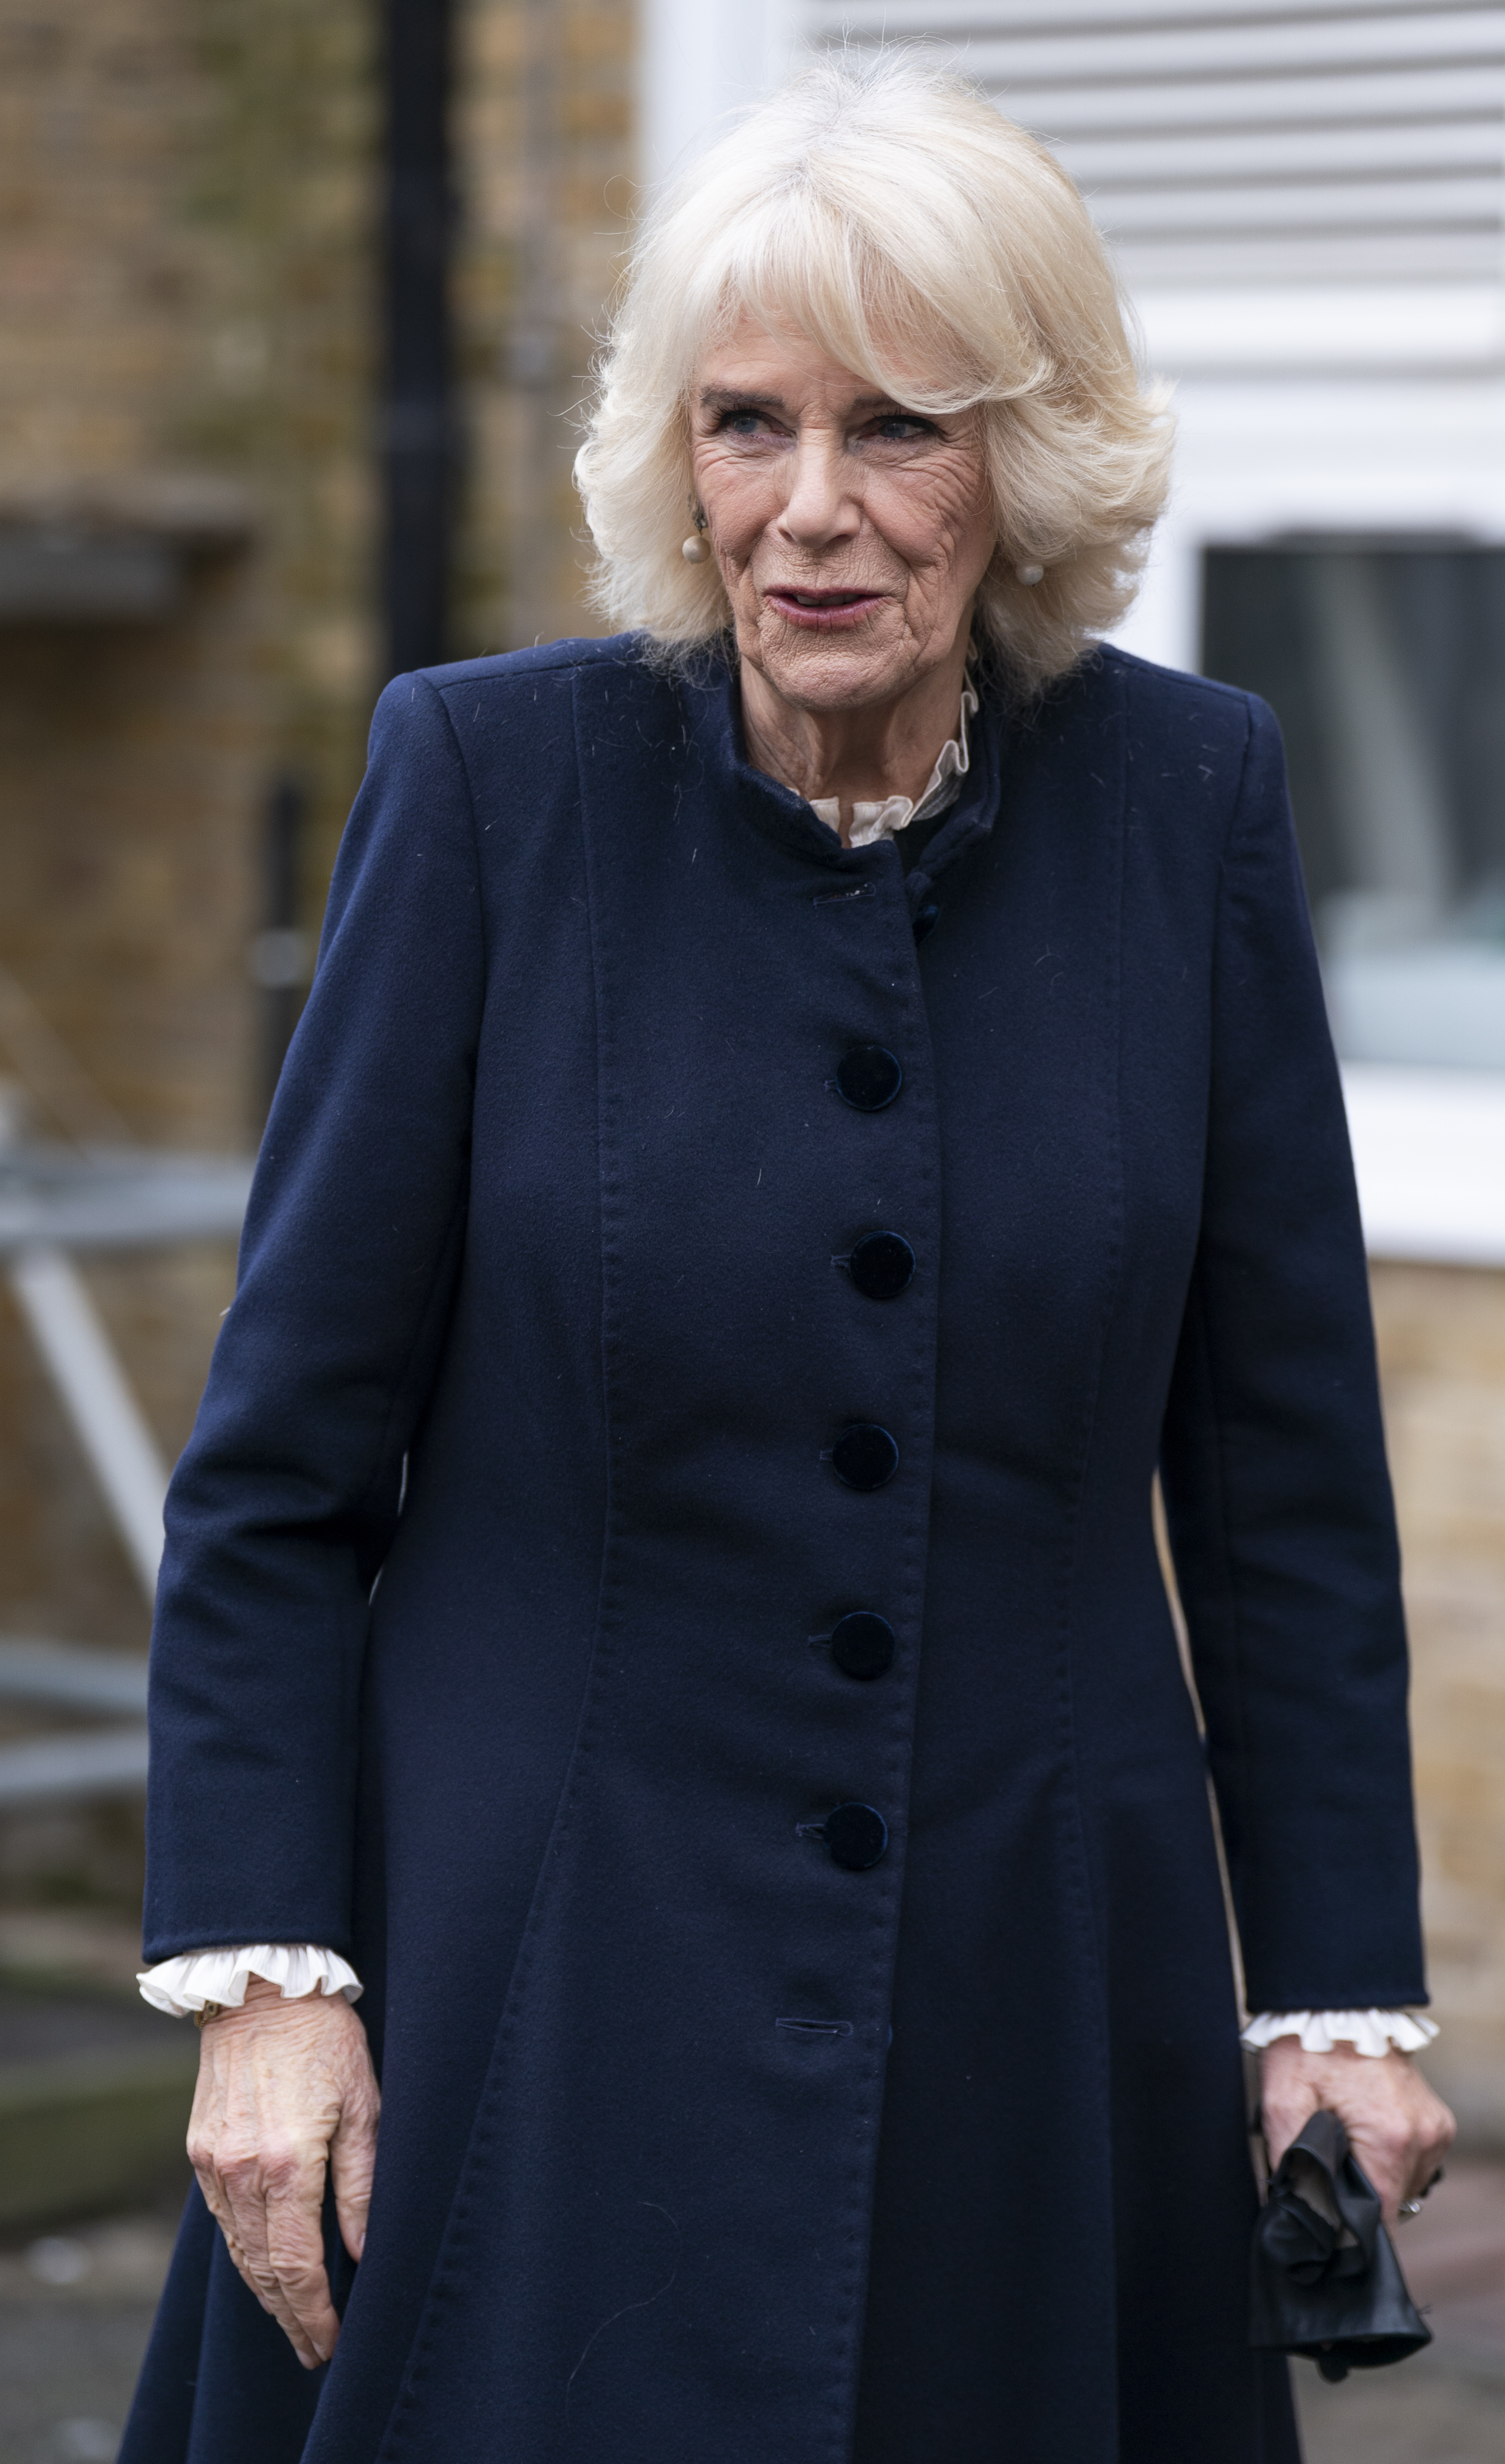  Camilla reveals she has bought ‘nice pieces’ from charity shops 